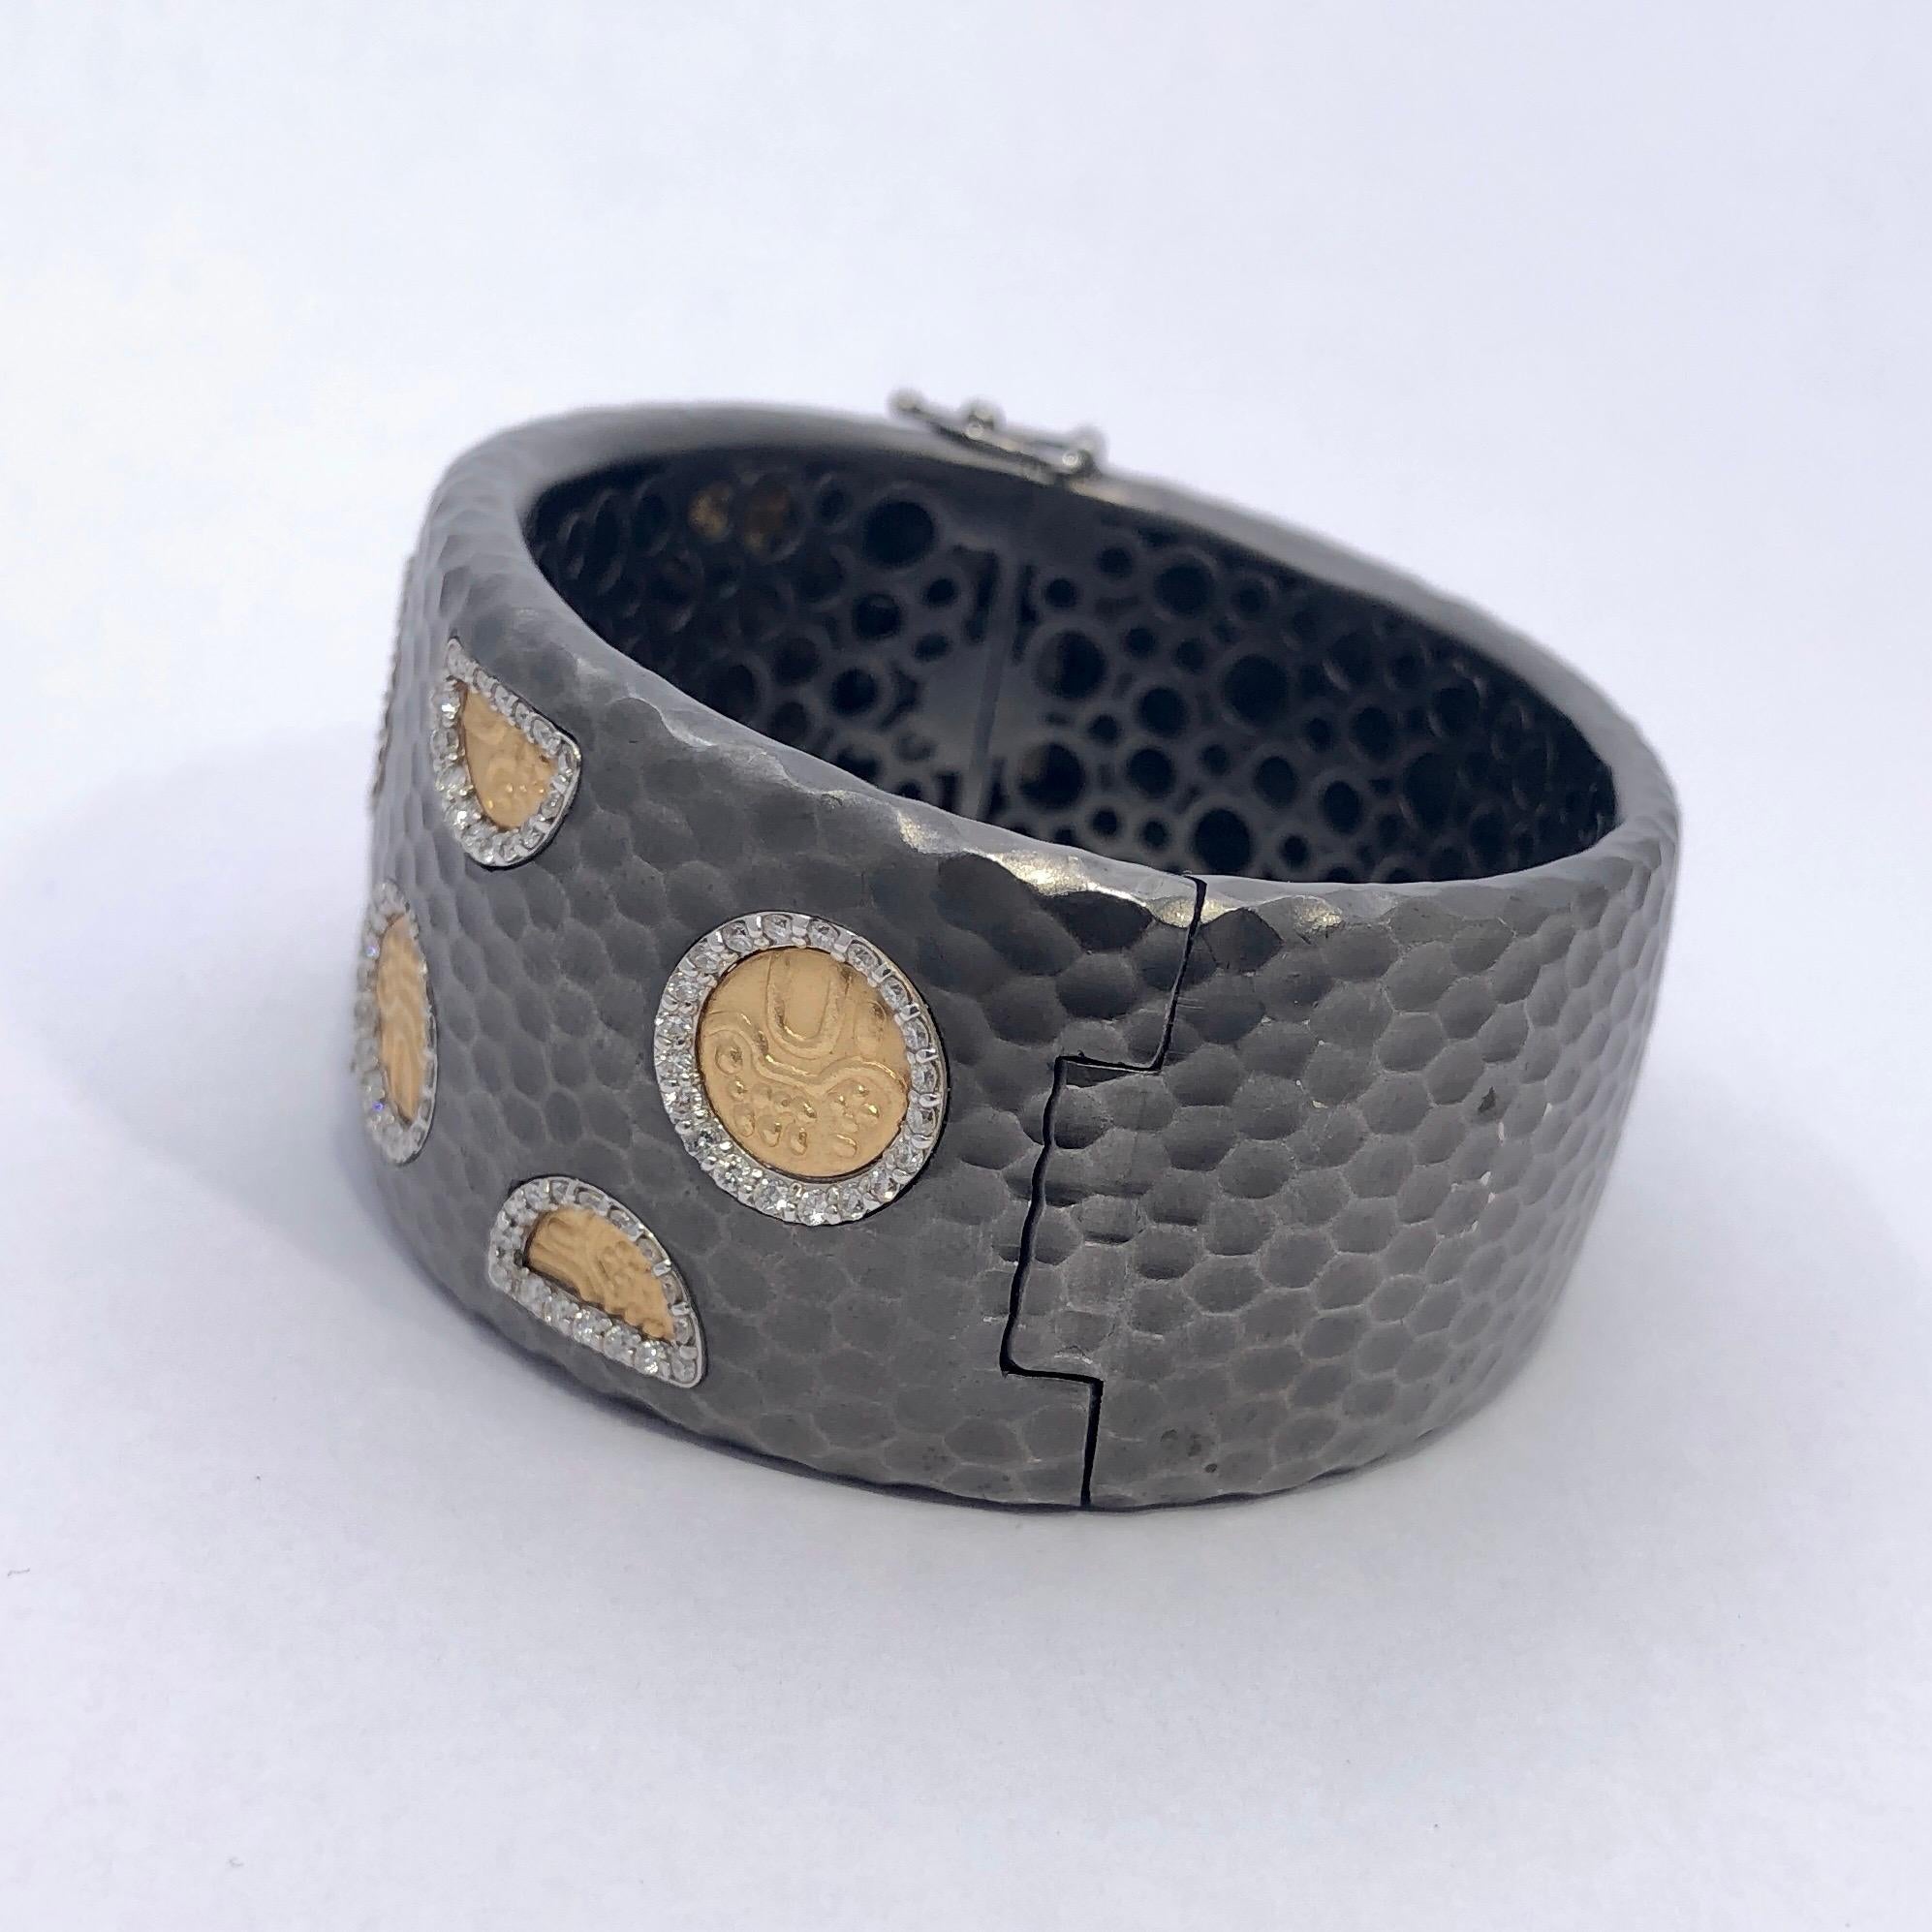 Women's Roberto Coin Hammered Cuff Bracelet with Gold Motifs and Diamonds